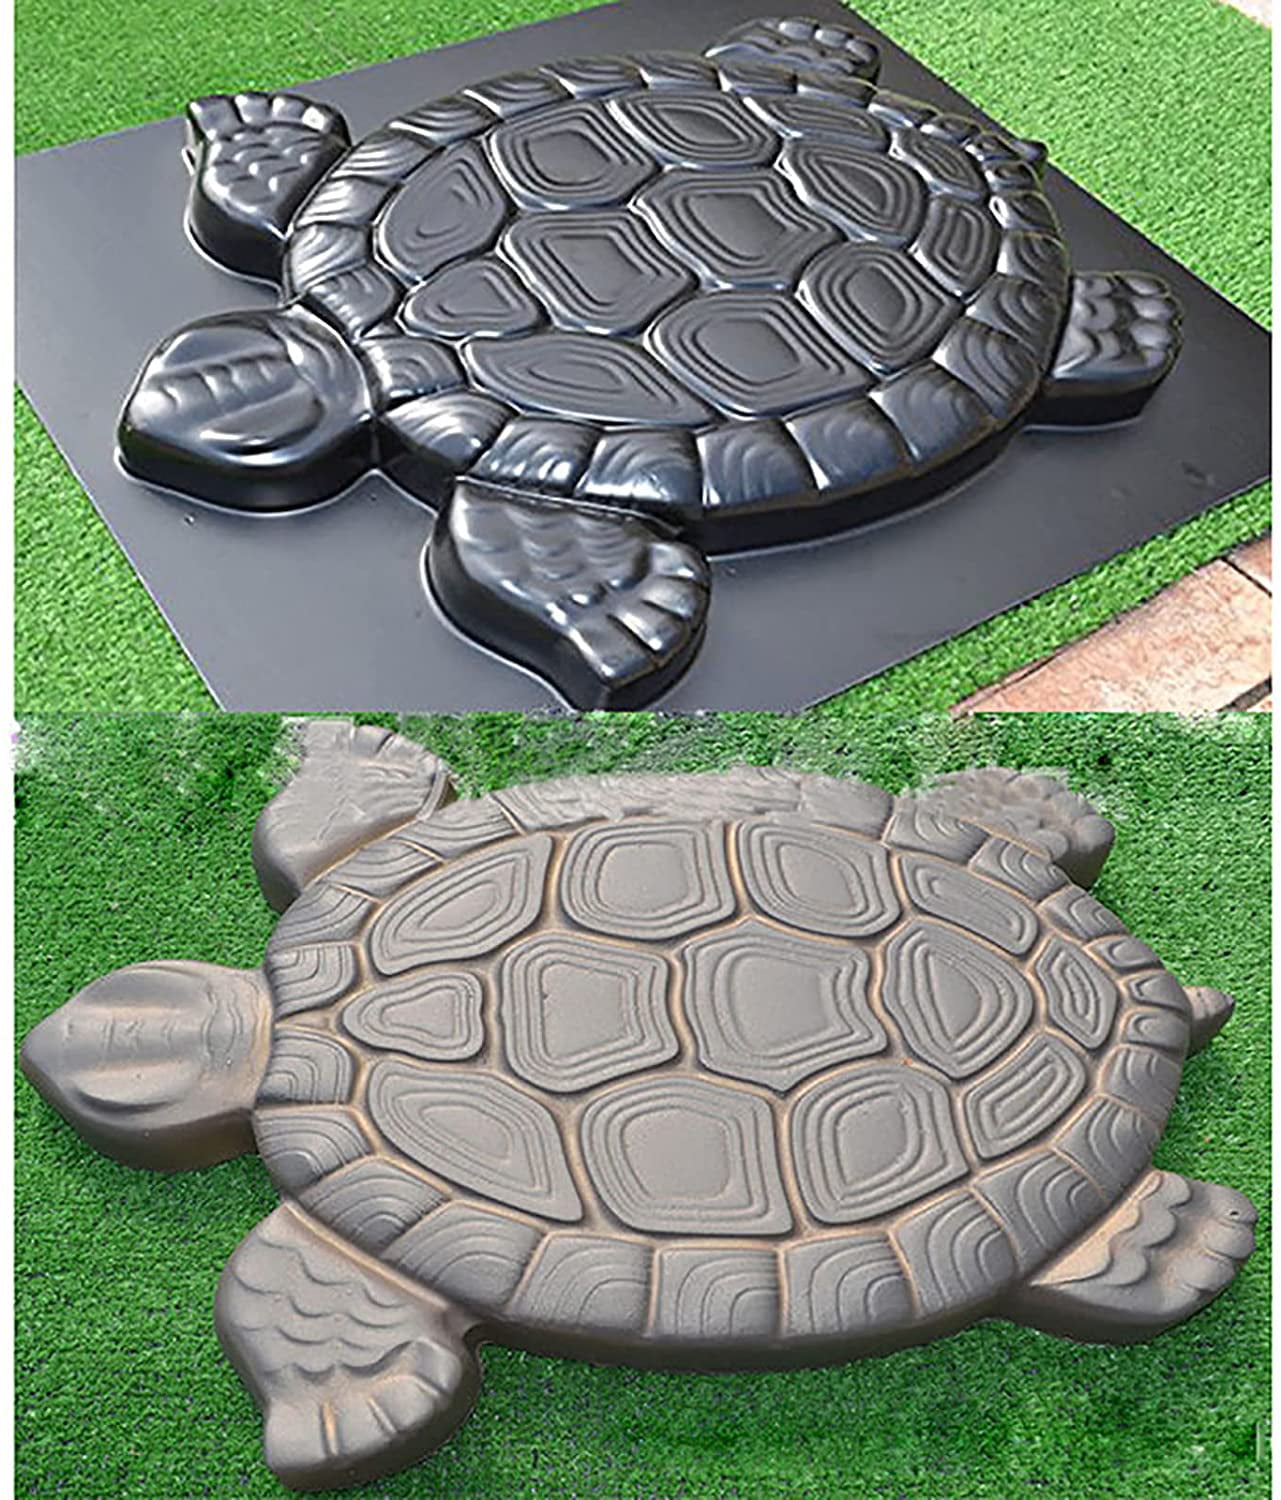 Frog stepping stone mold plaster concrete casting mould 11" x 10" x 3/4" thick 